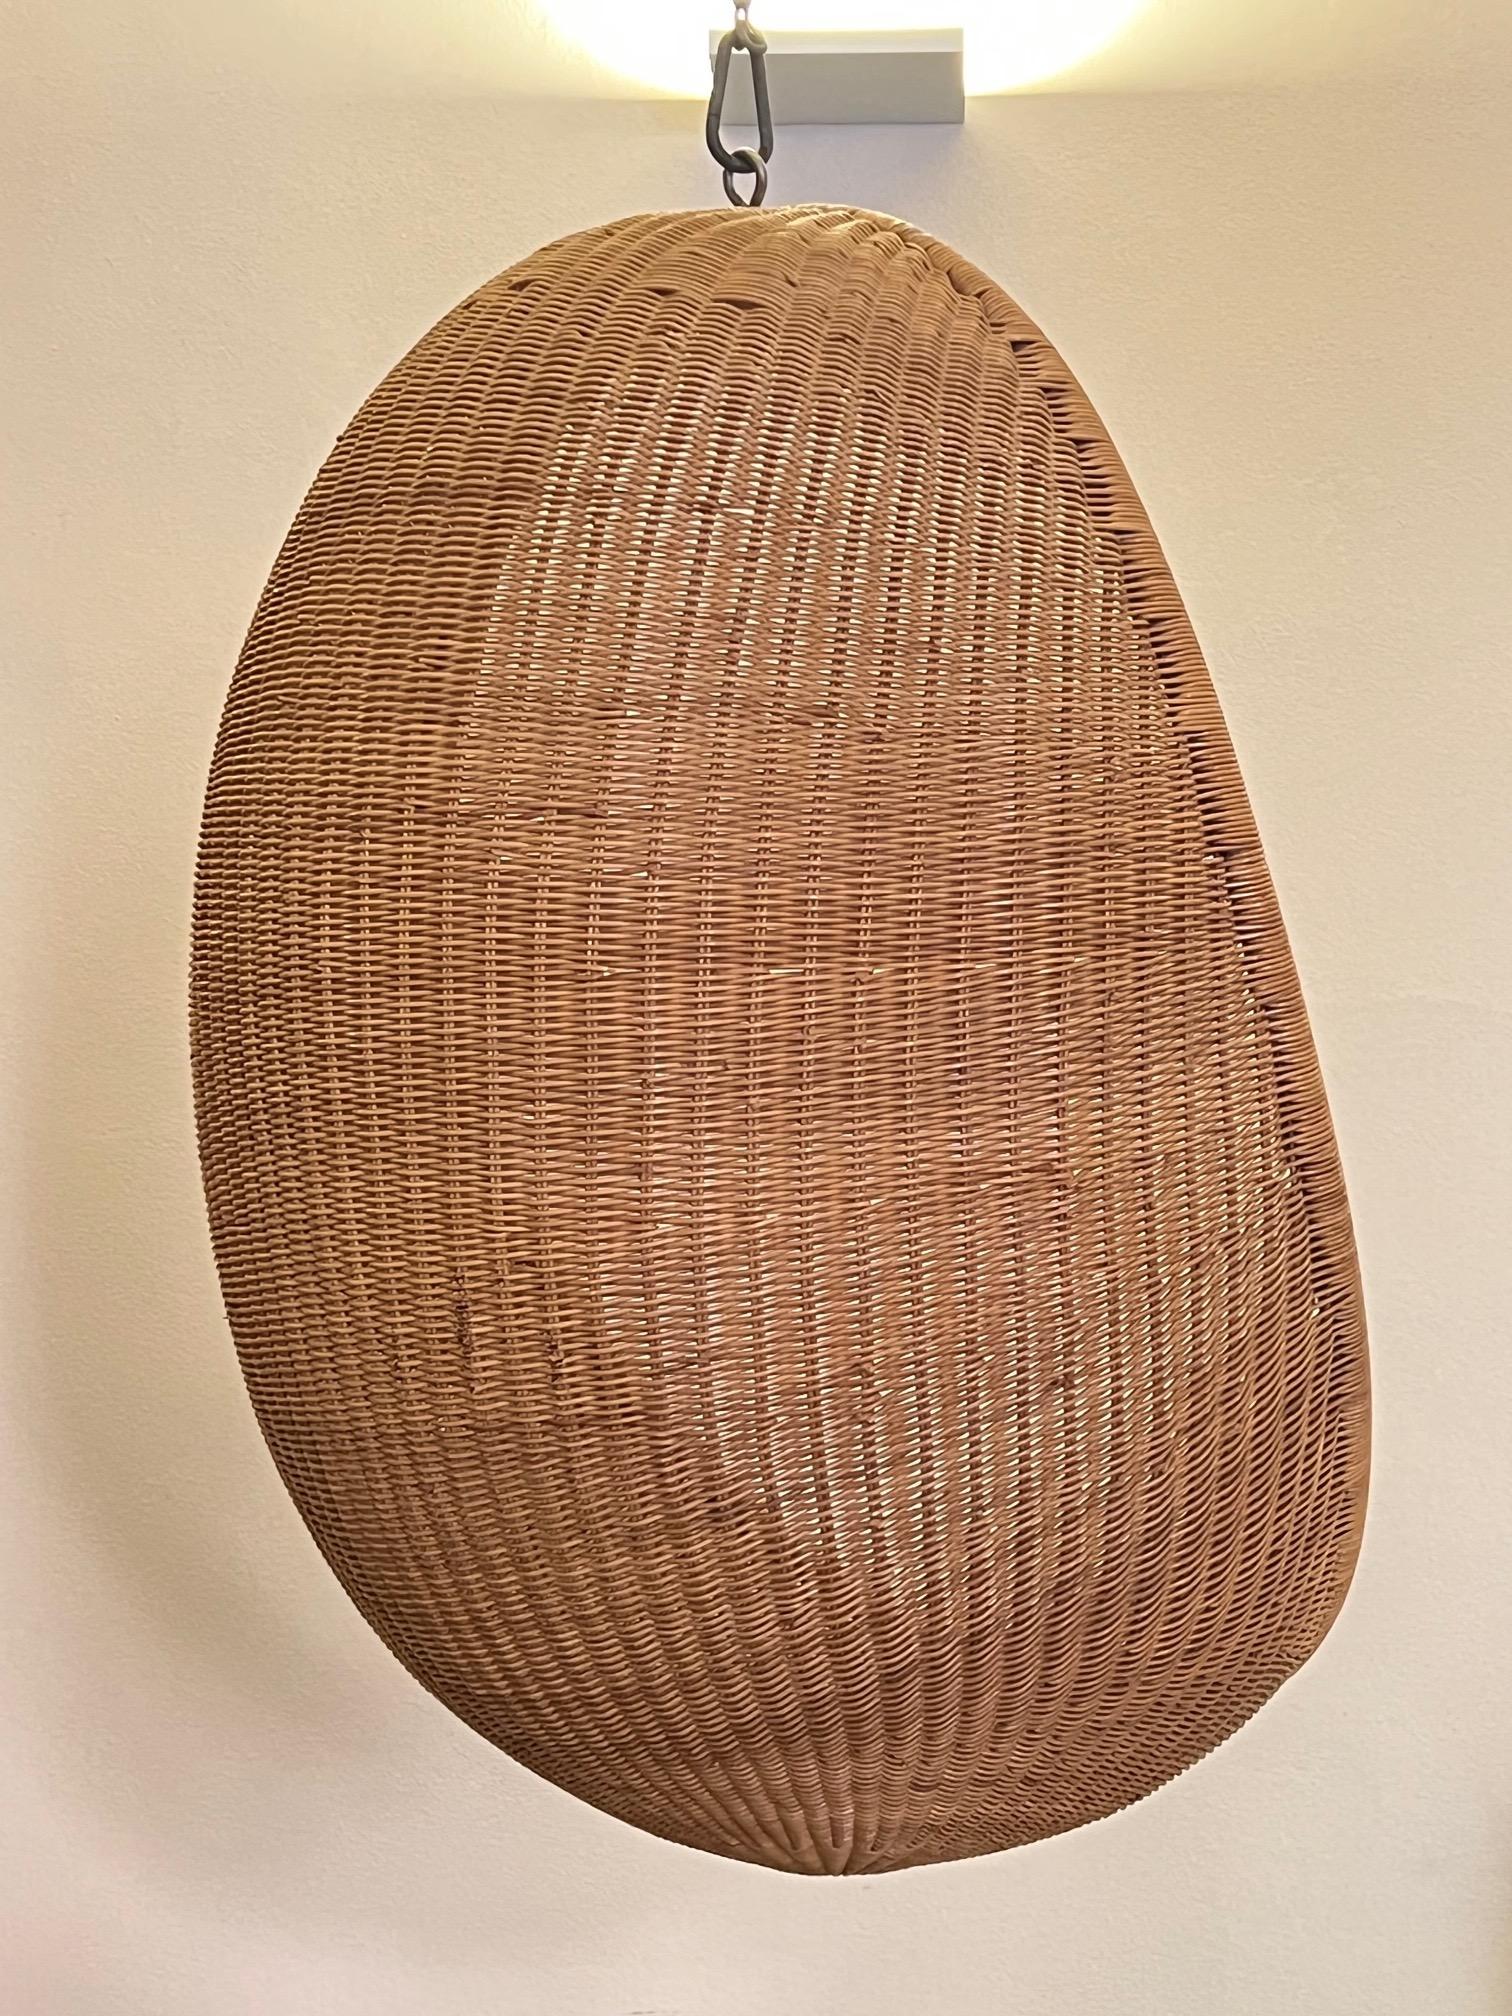 Mid-20th Century Egg Hanging Chair by Nanna Ditzel, Authentic Historical Edition, 1959